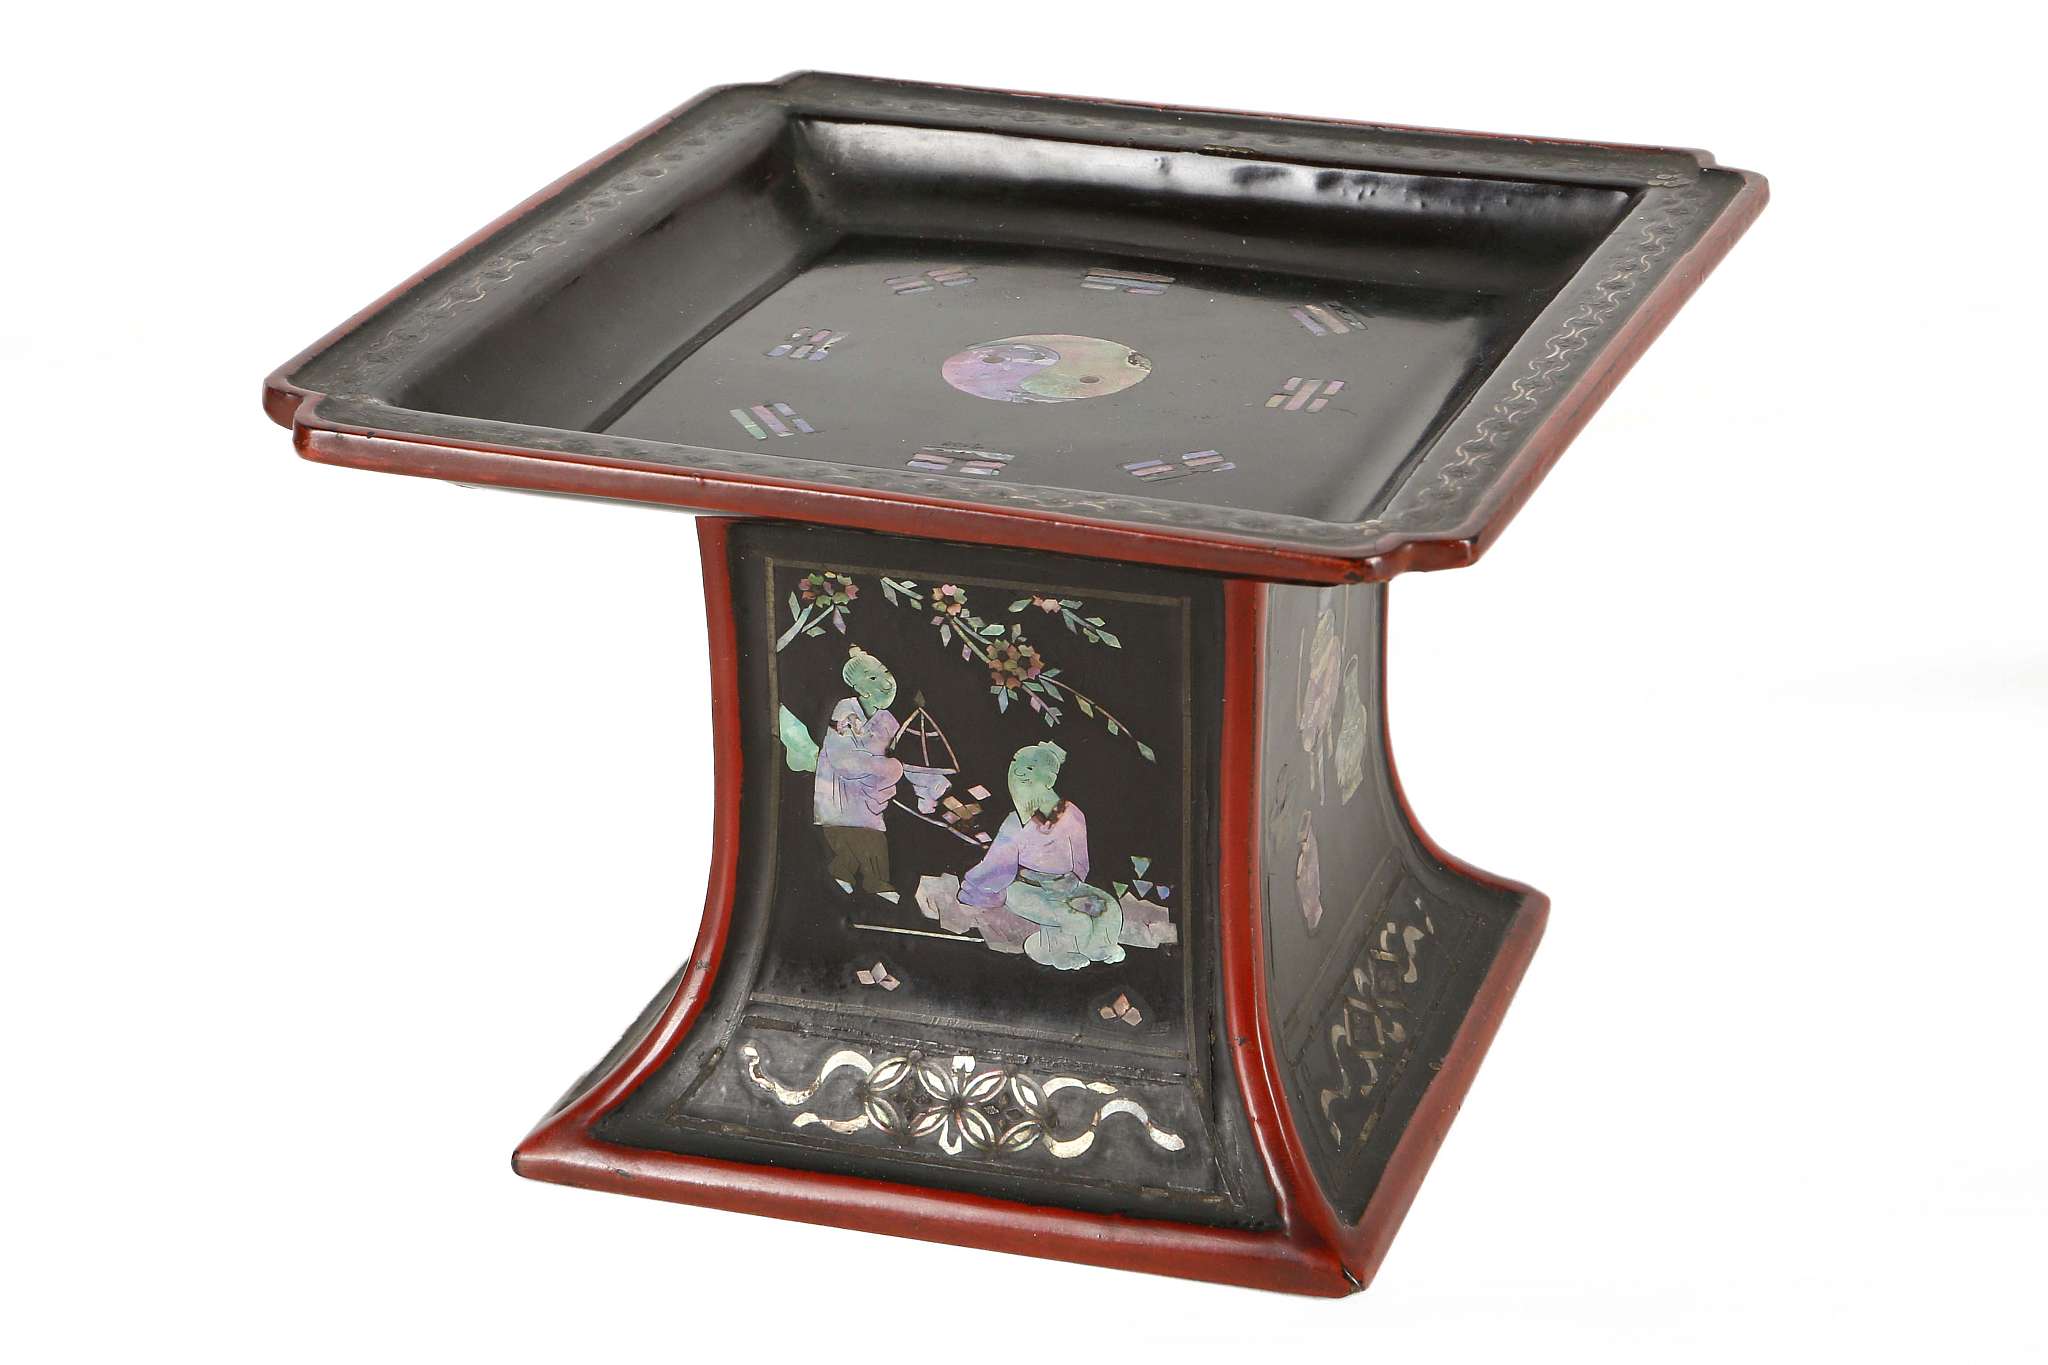 A ‘JIANG QIANLI’ MOTHER-OF-PEARL INLAID BLACK LACQUER RECTANGULAR TRAY AND STAND.
Late 17th Century,